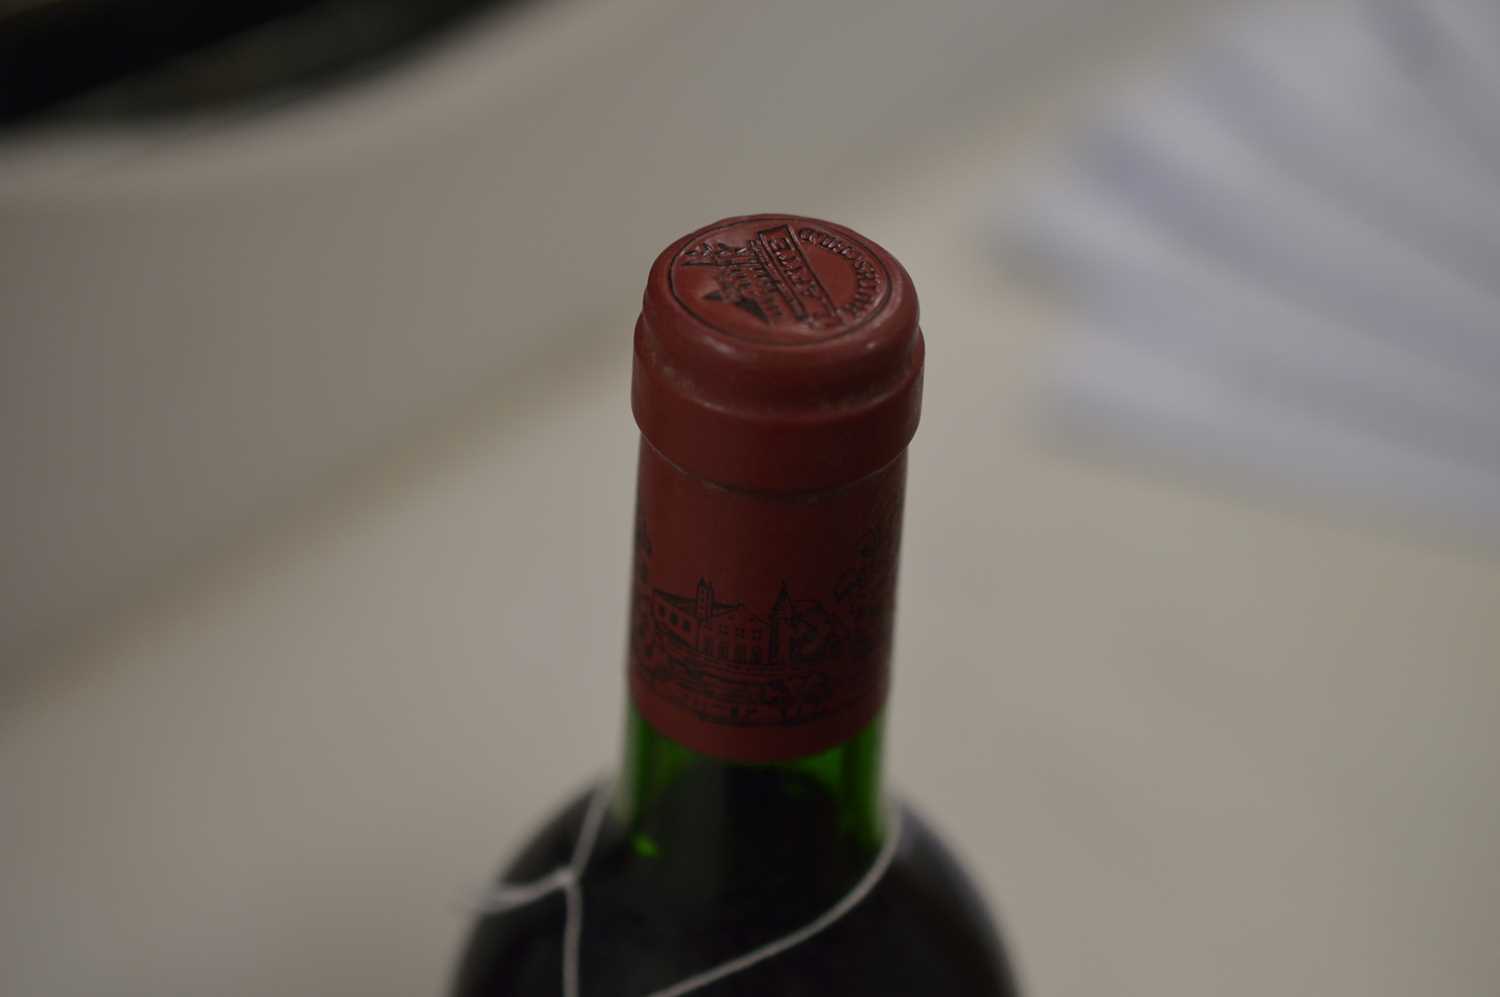 One bottle of Chateau Lafite Rothschild 1982, - Image 4 of 4